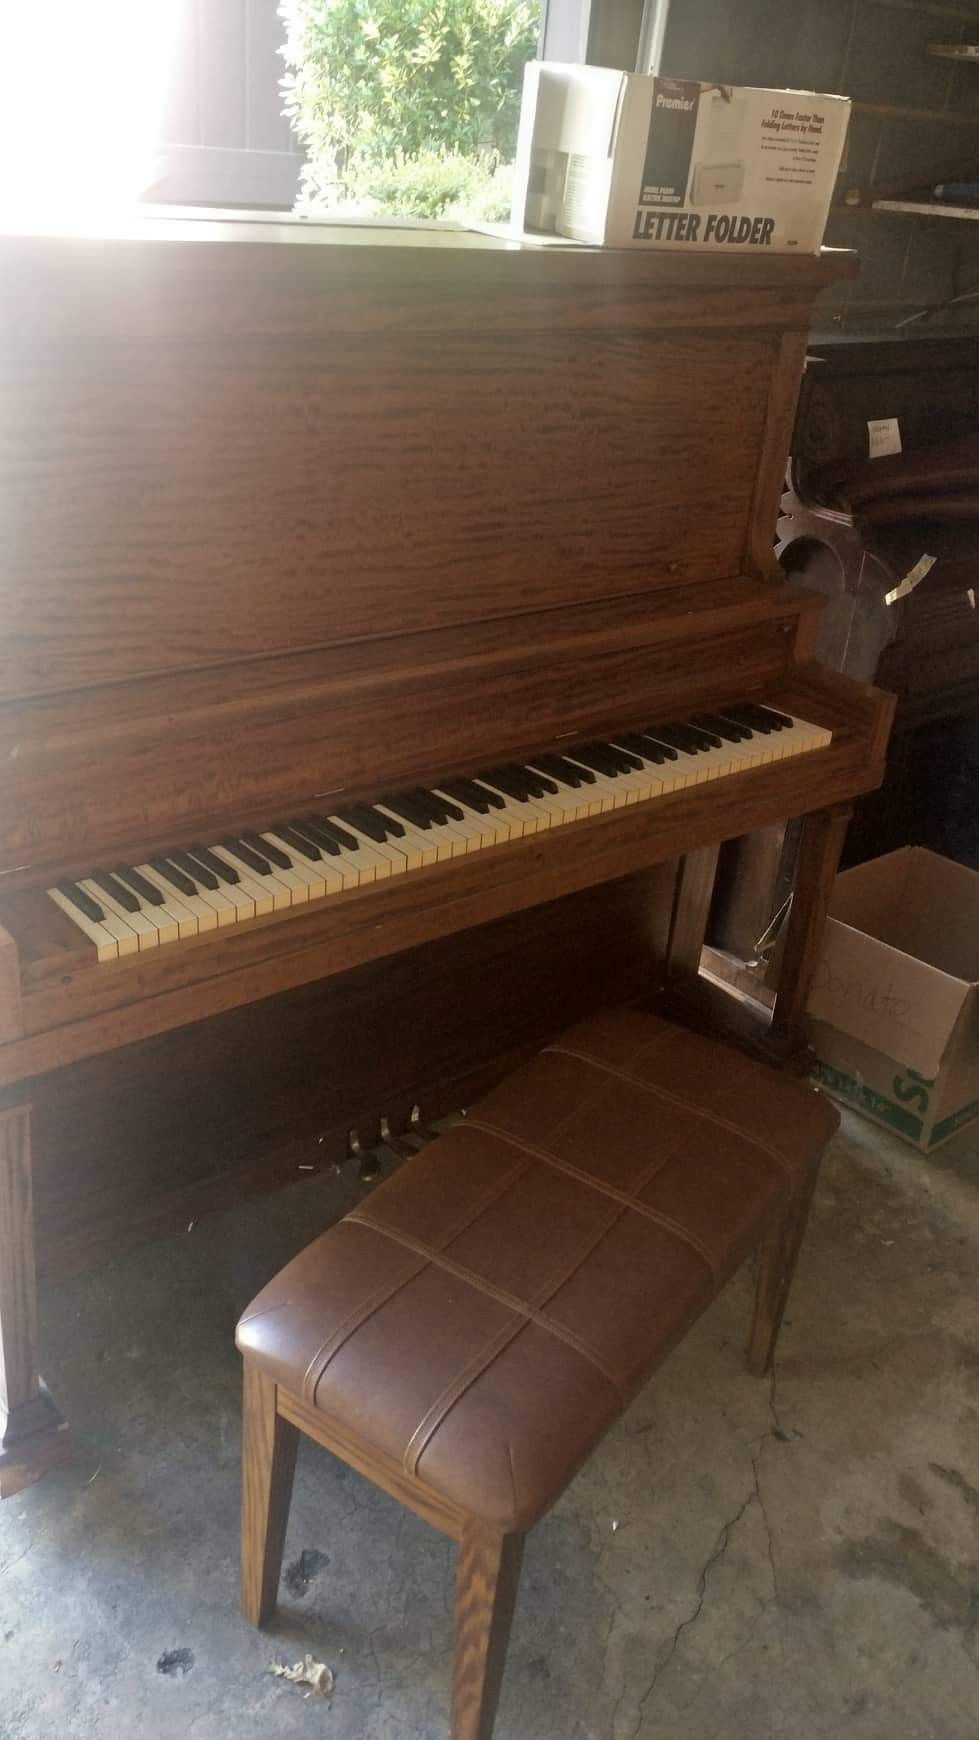 Becker Bros piano (working), with chair